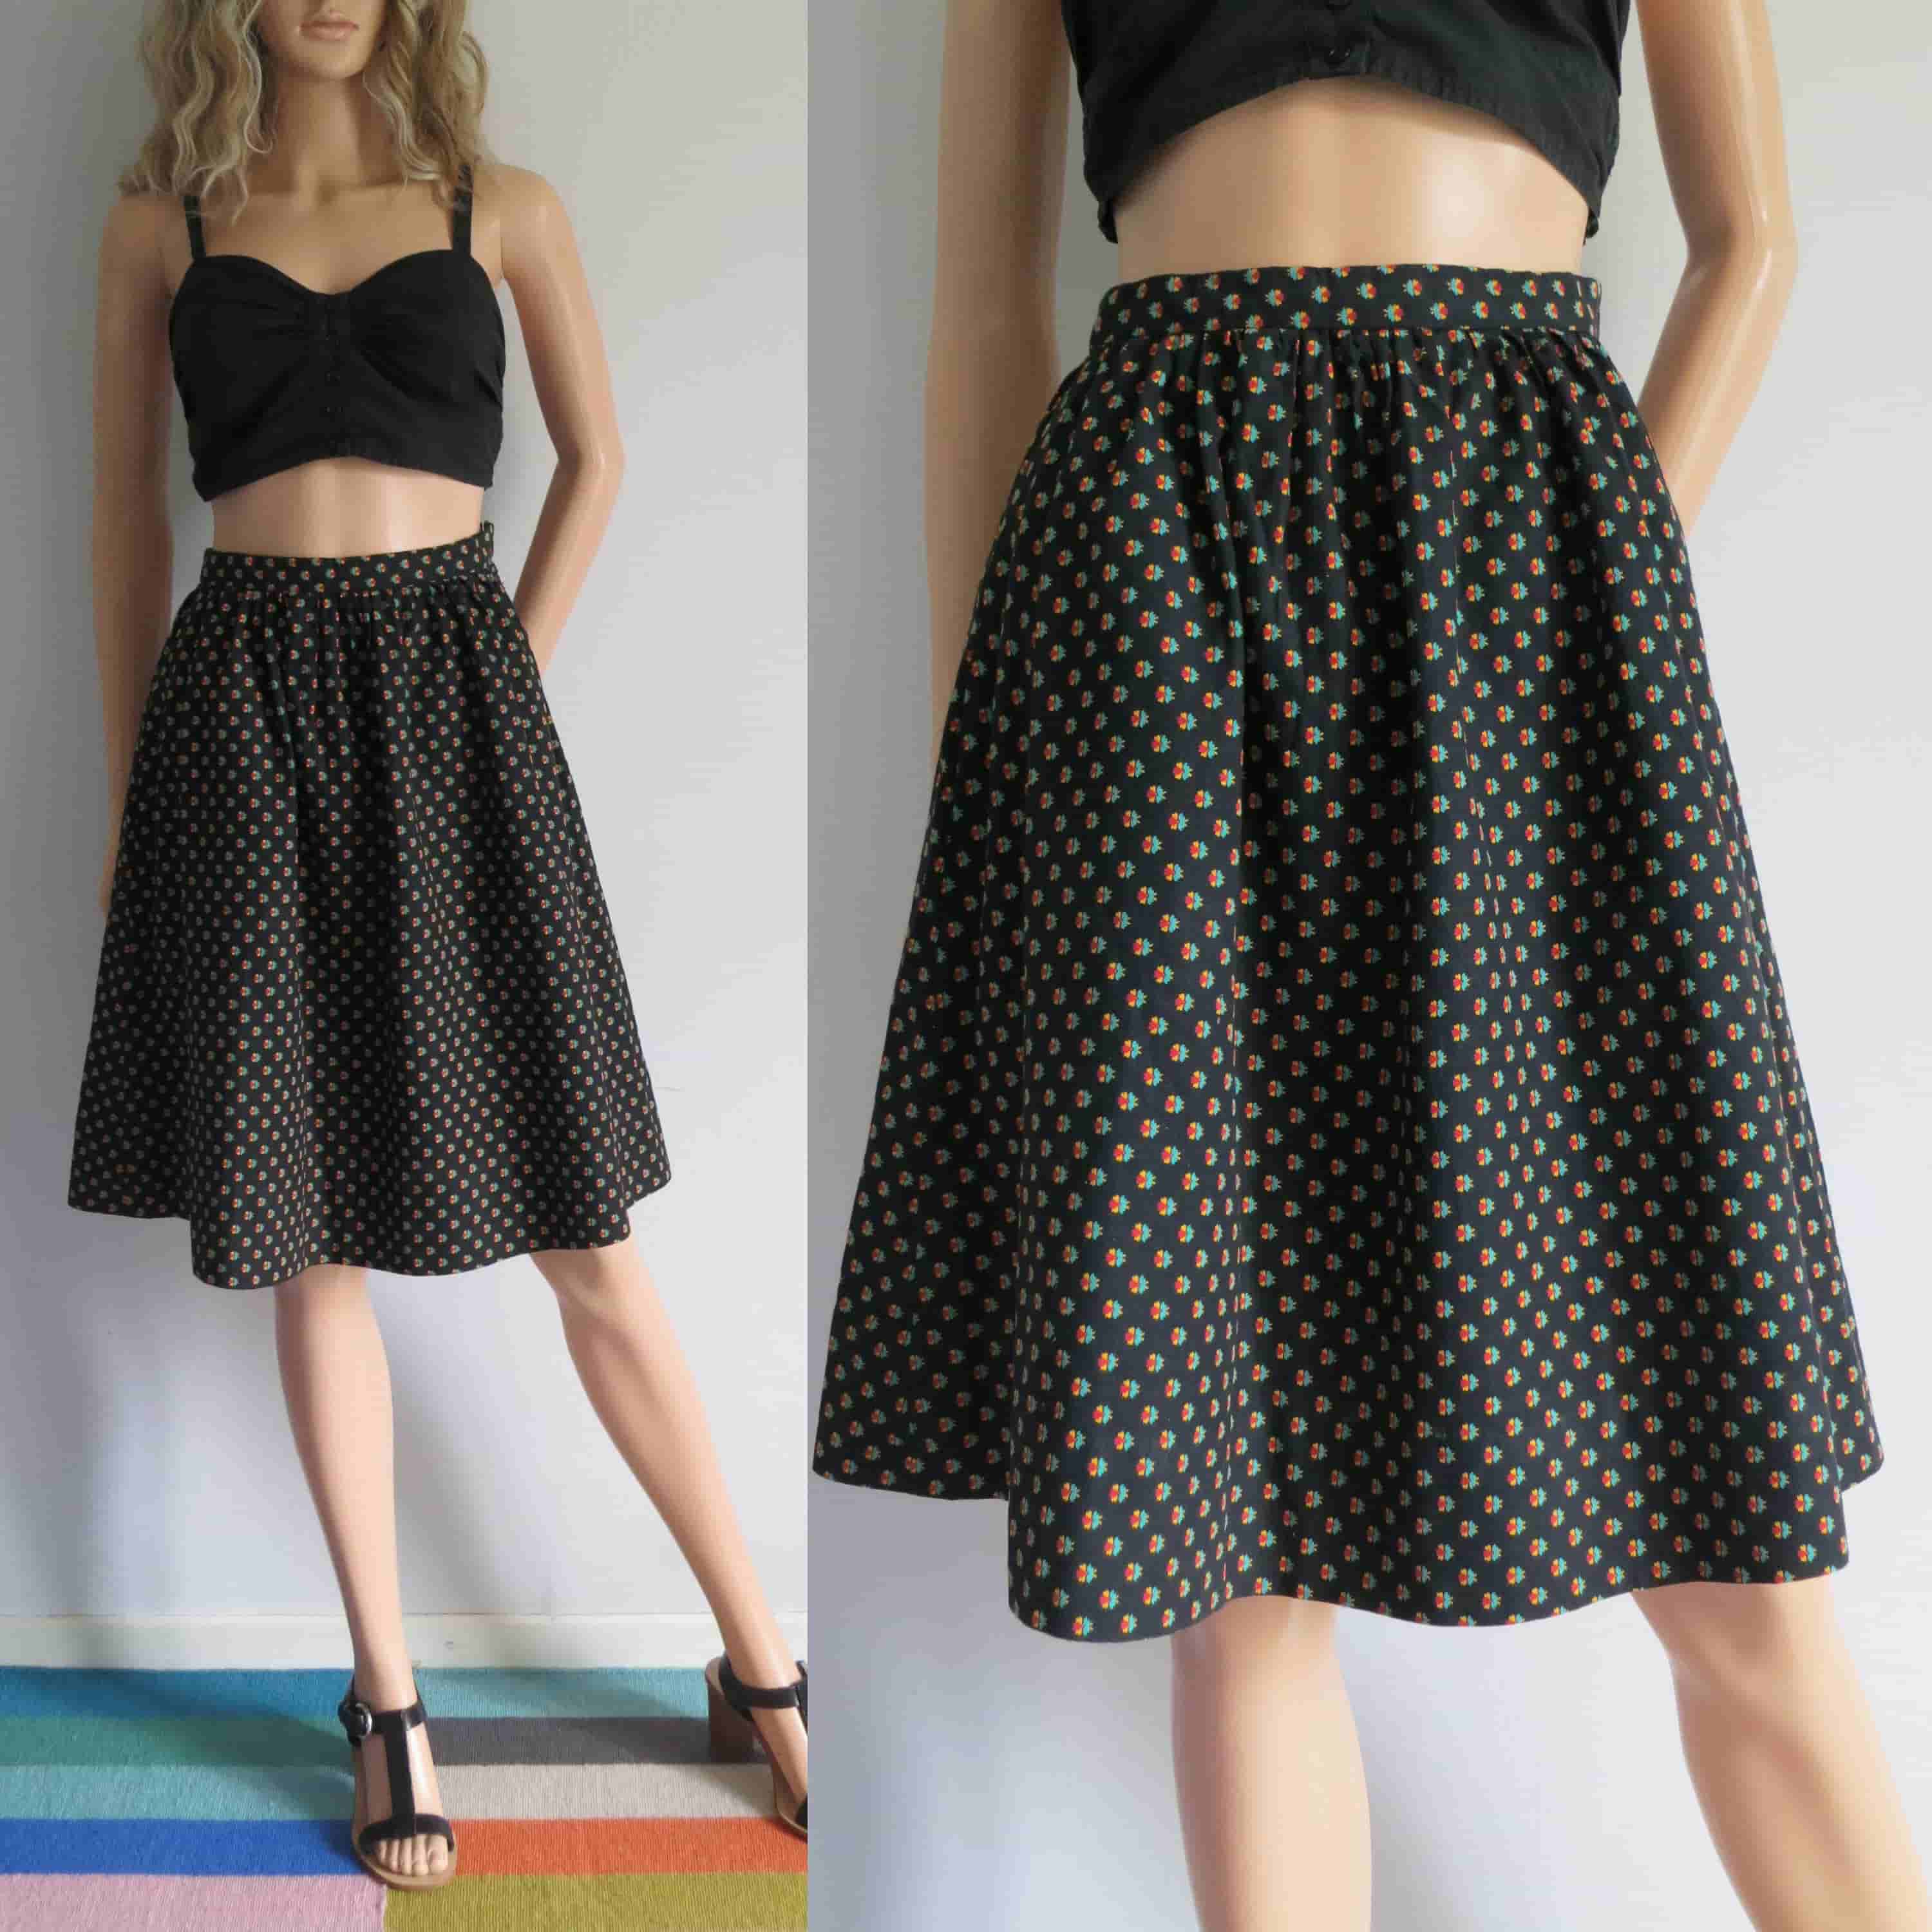 Cotton- Patterned skirt